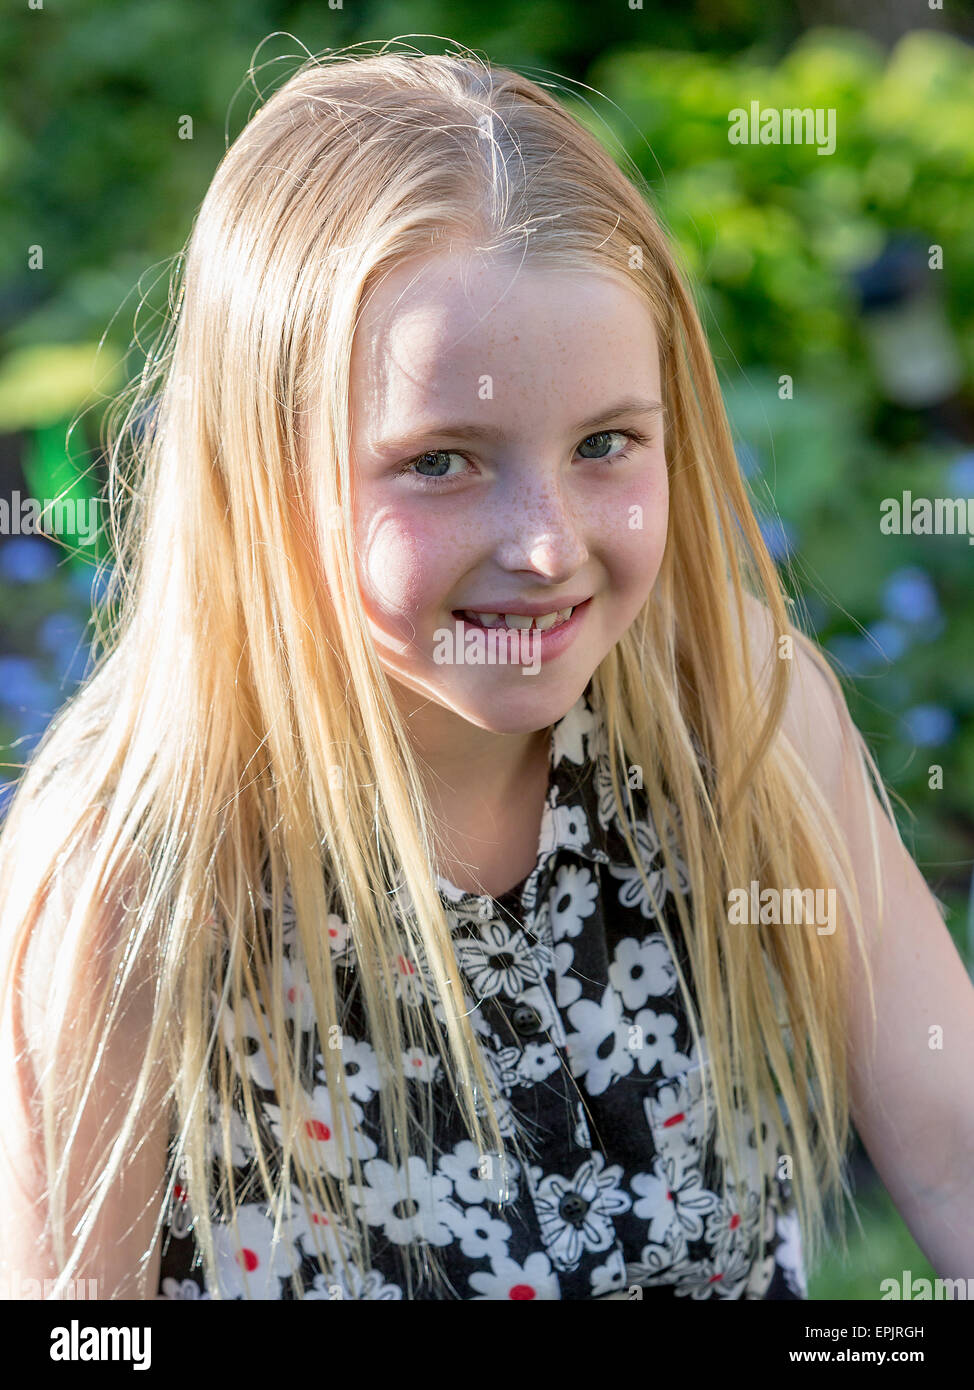 Blonde 8 year old girl sitting in a garden posing for the camera Stock Photo